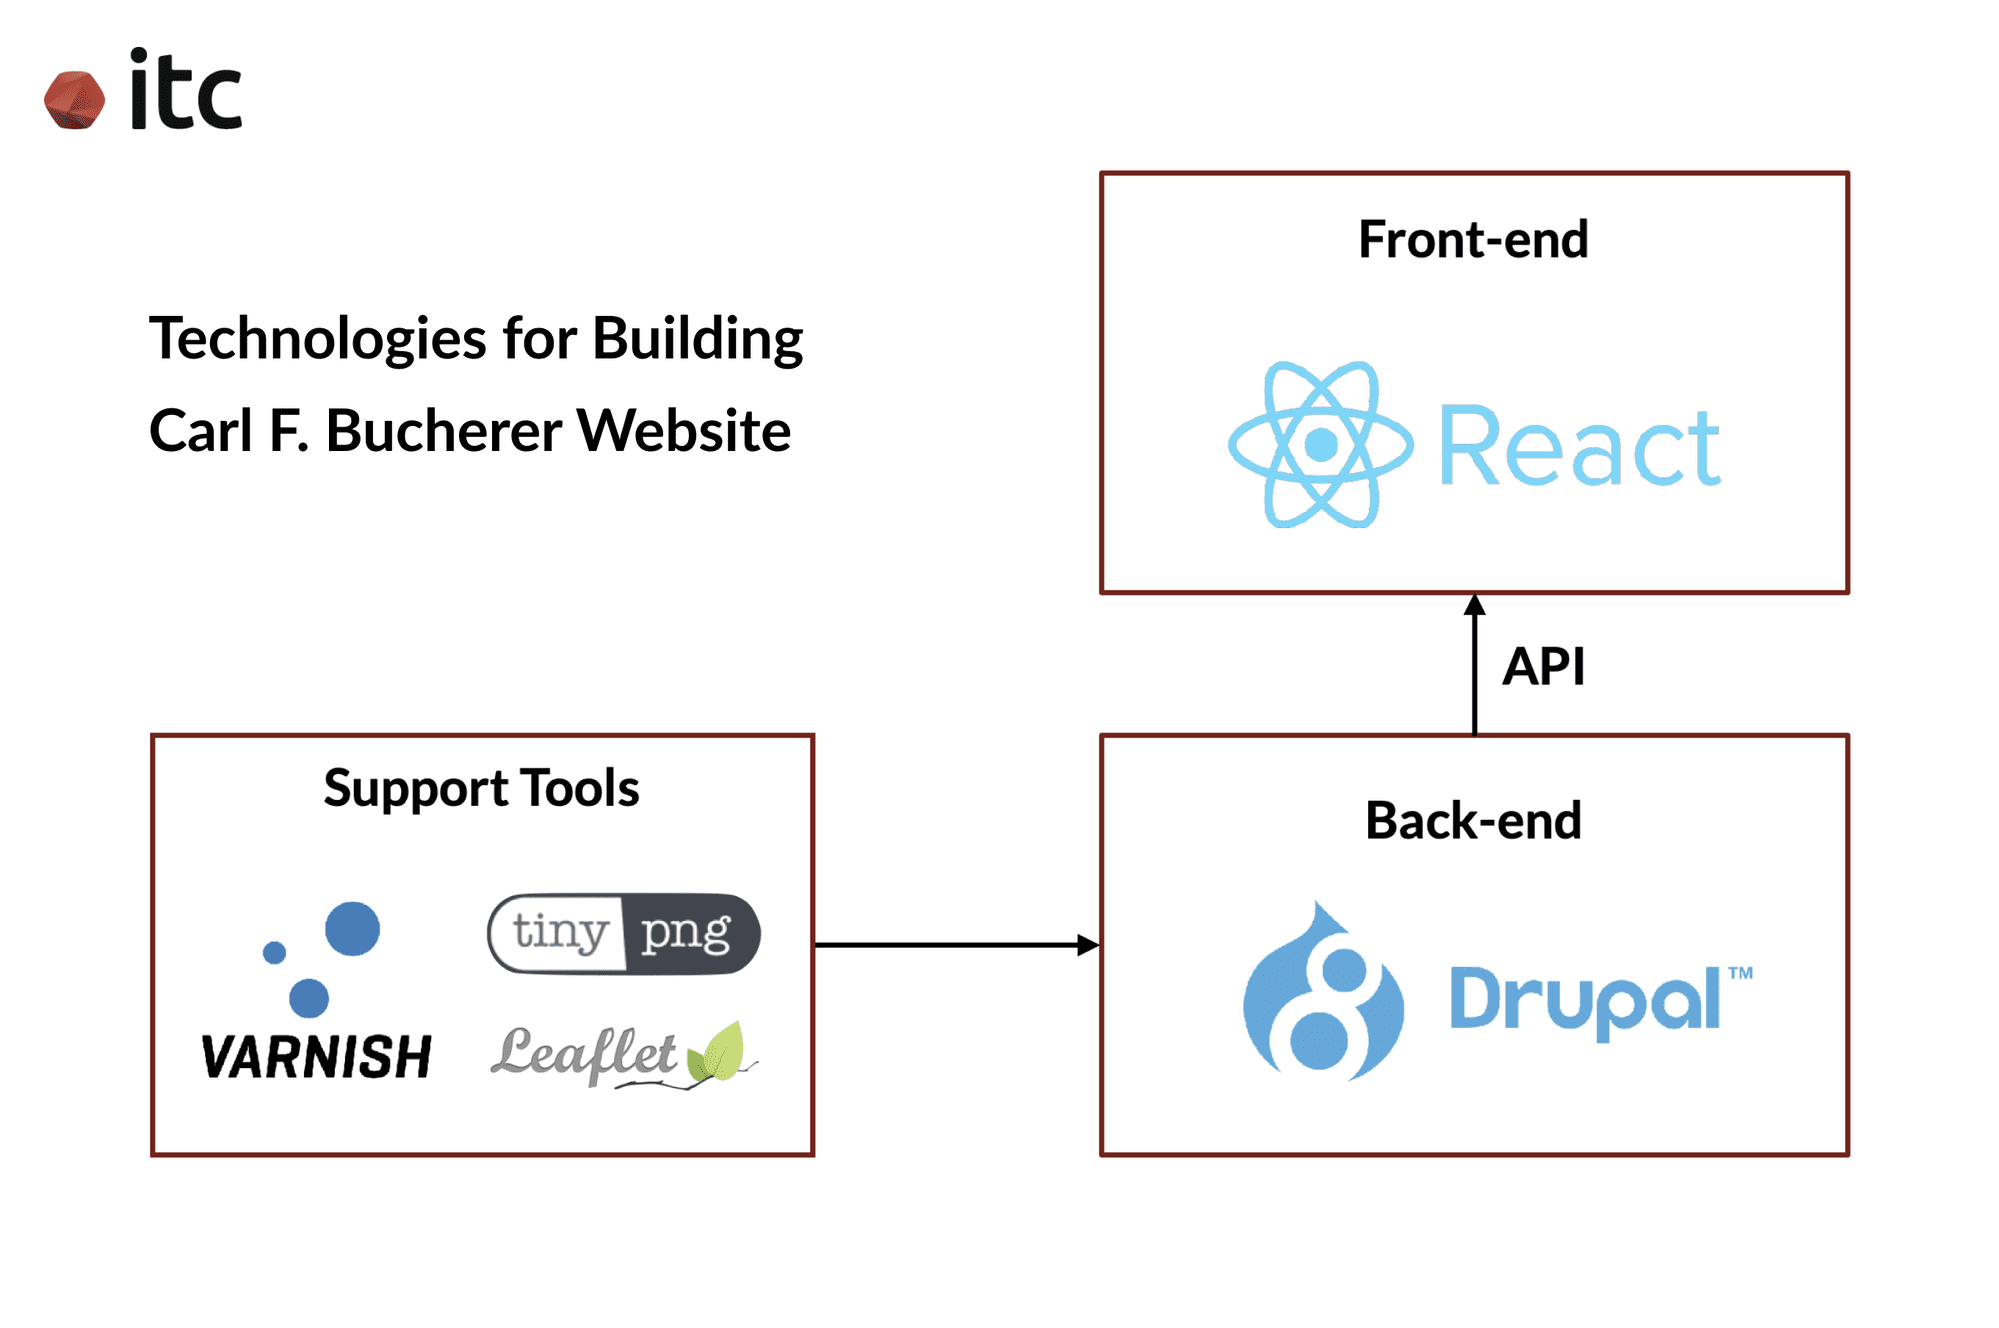 ITC helped develop the CFB website with Drupal 8 as the backend and React as the frontend framework. We also utilized other supporting tools including Varnish accelerator, Tinypng, and Leaflet map